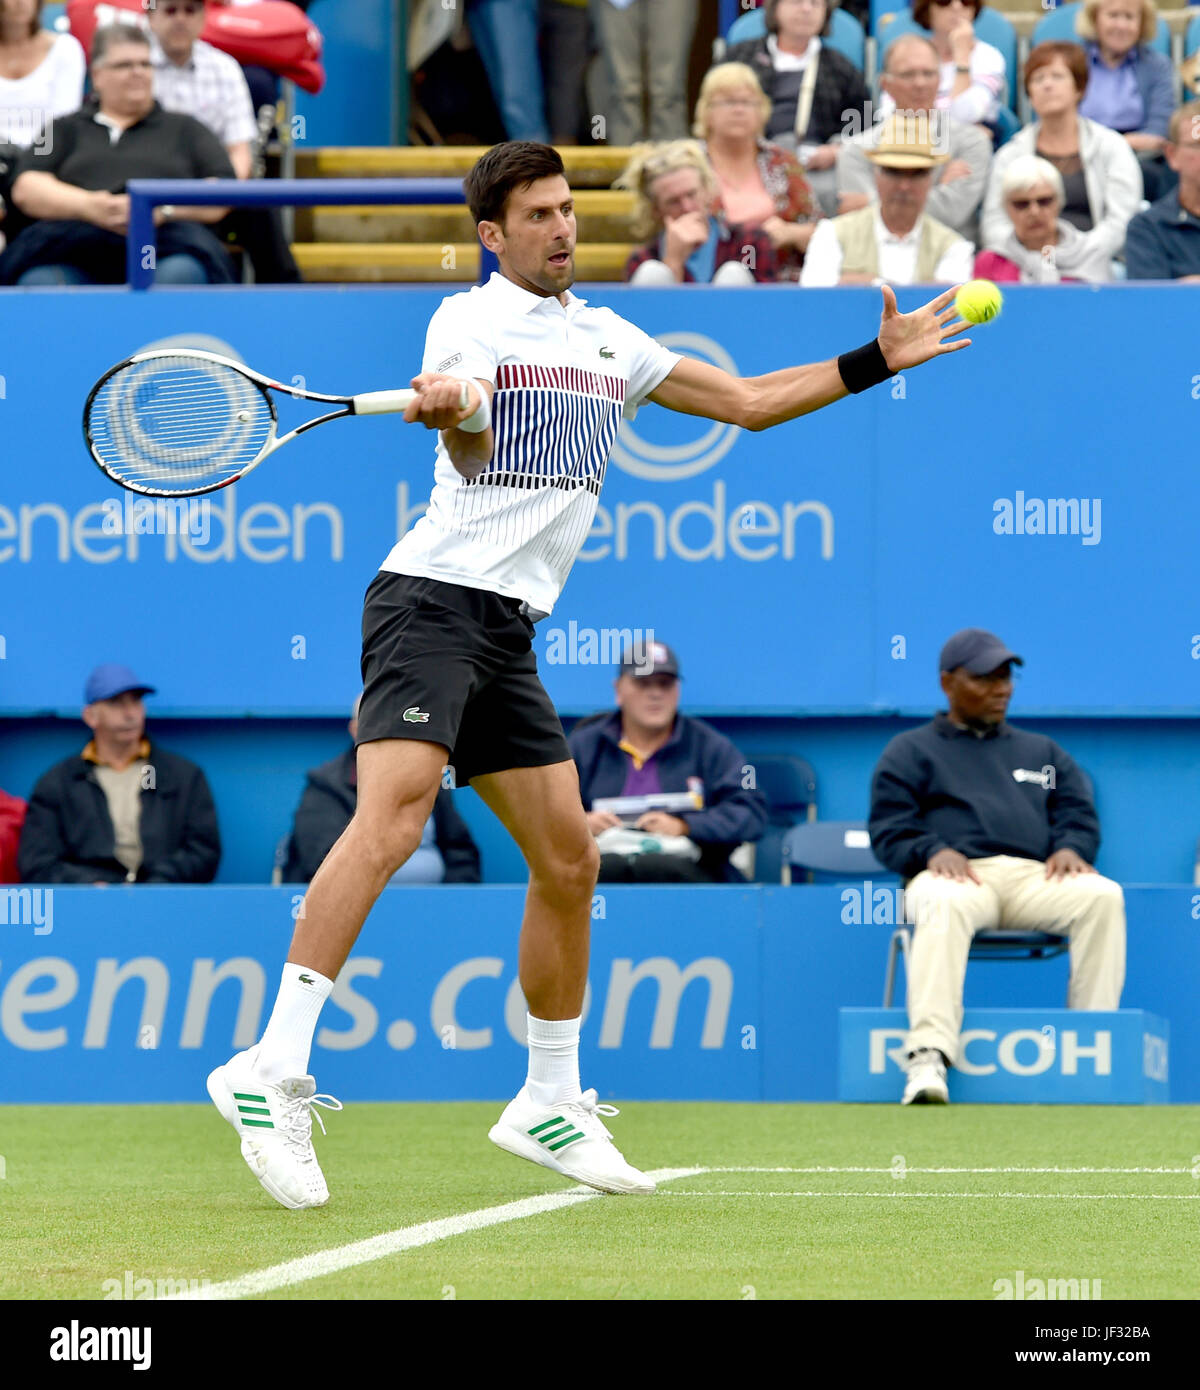 Novak Djokovic of Serbia in action at the Aegon International Eastbourne tennis tournament at Devonshire Park , Eastbourne Sussex UK . 28 Jun 2017 Photograph taken by Simon Dack Stock Photo